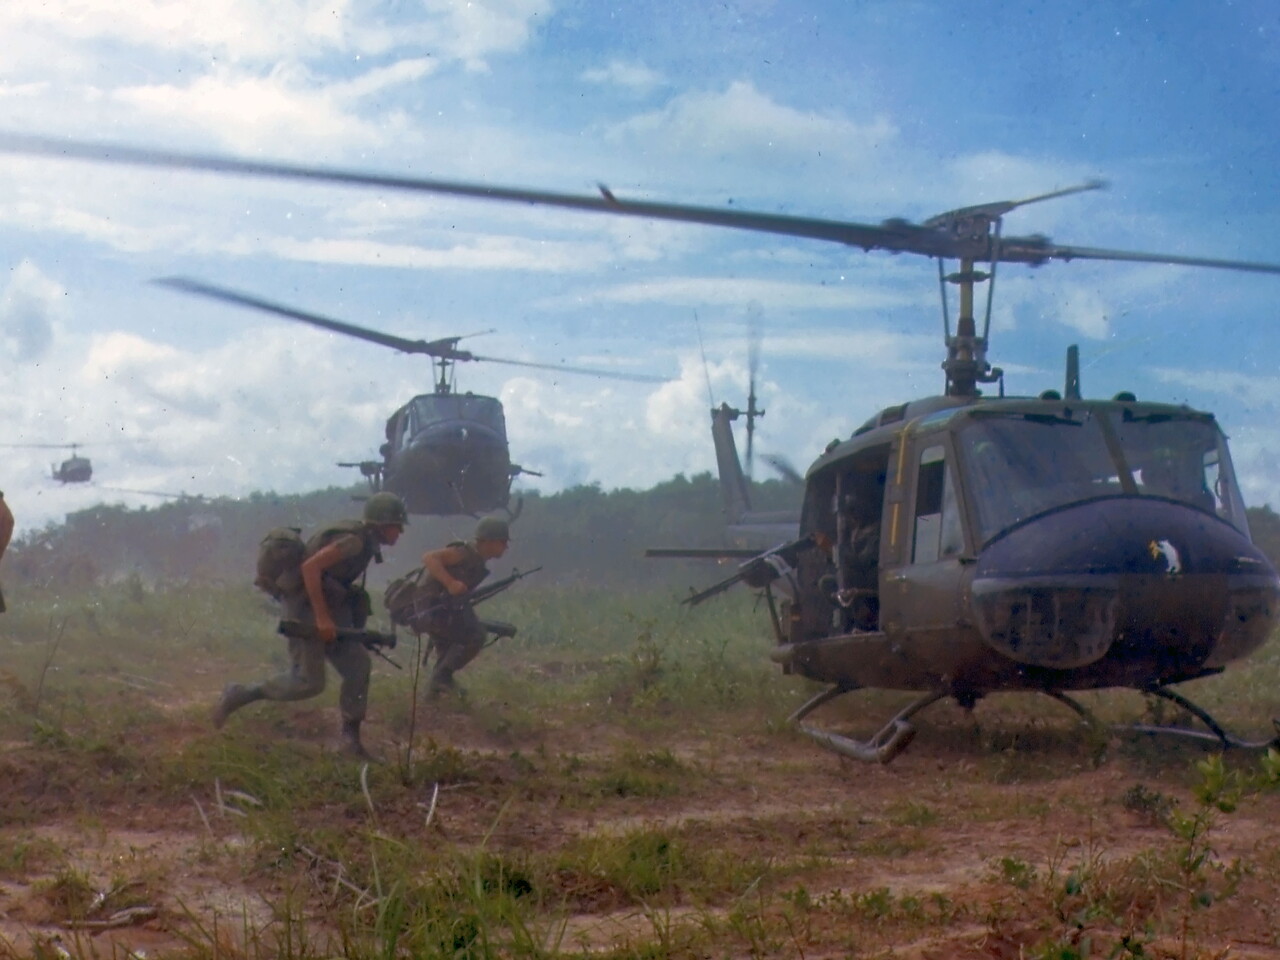 American soldiers running to a helicopter